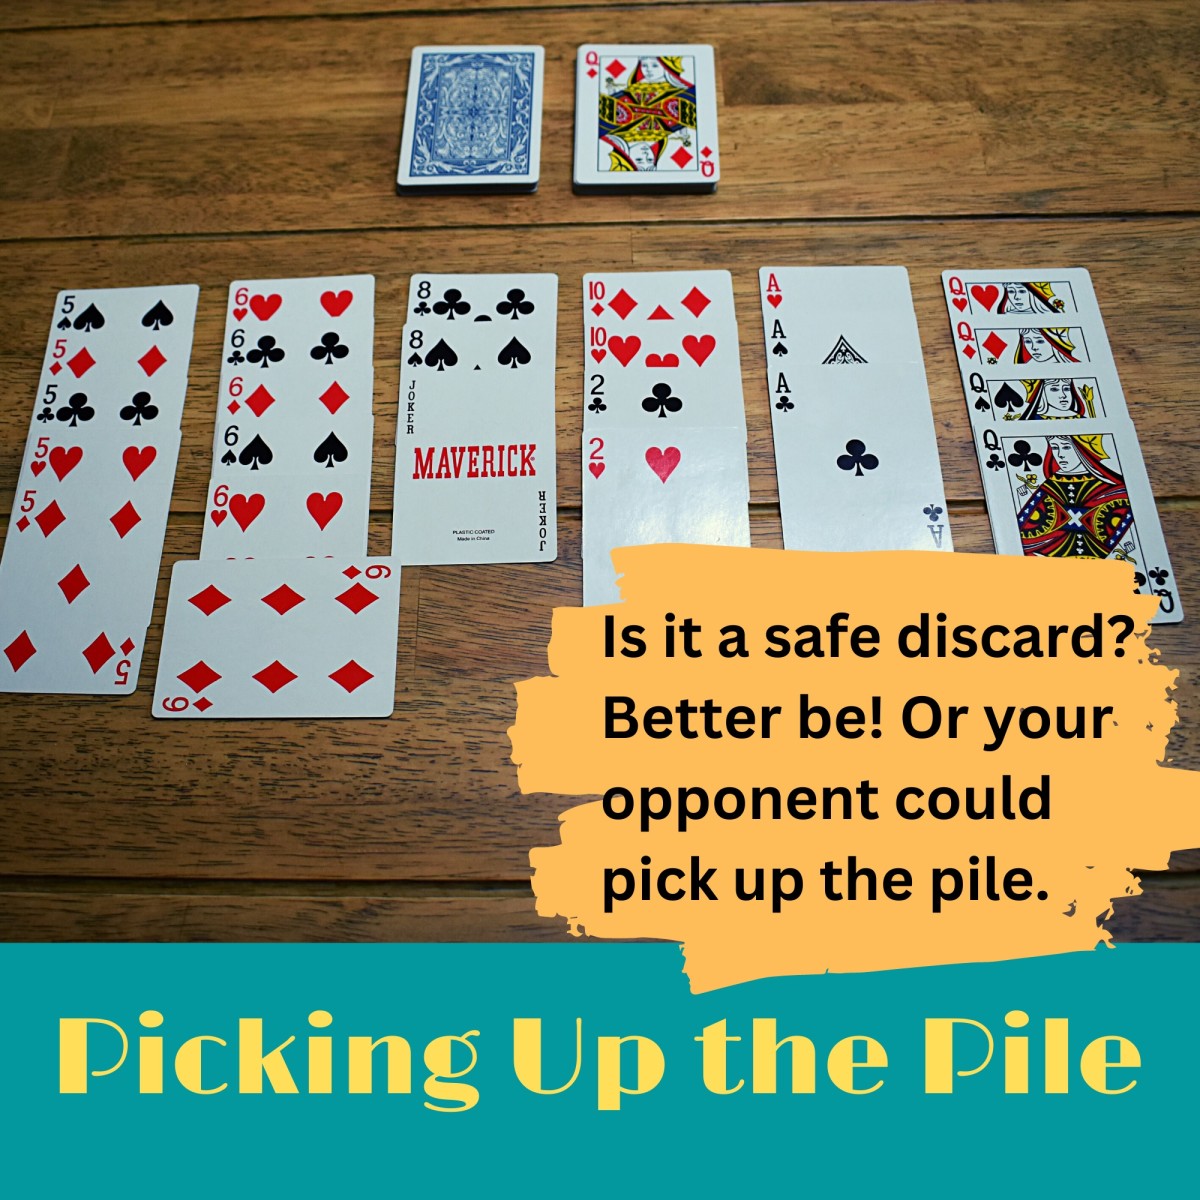 how-to-play-canasta-rules-of-the-game-scoring-and-terminology